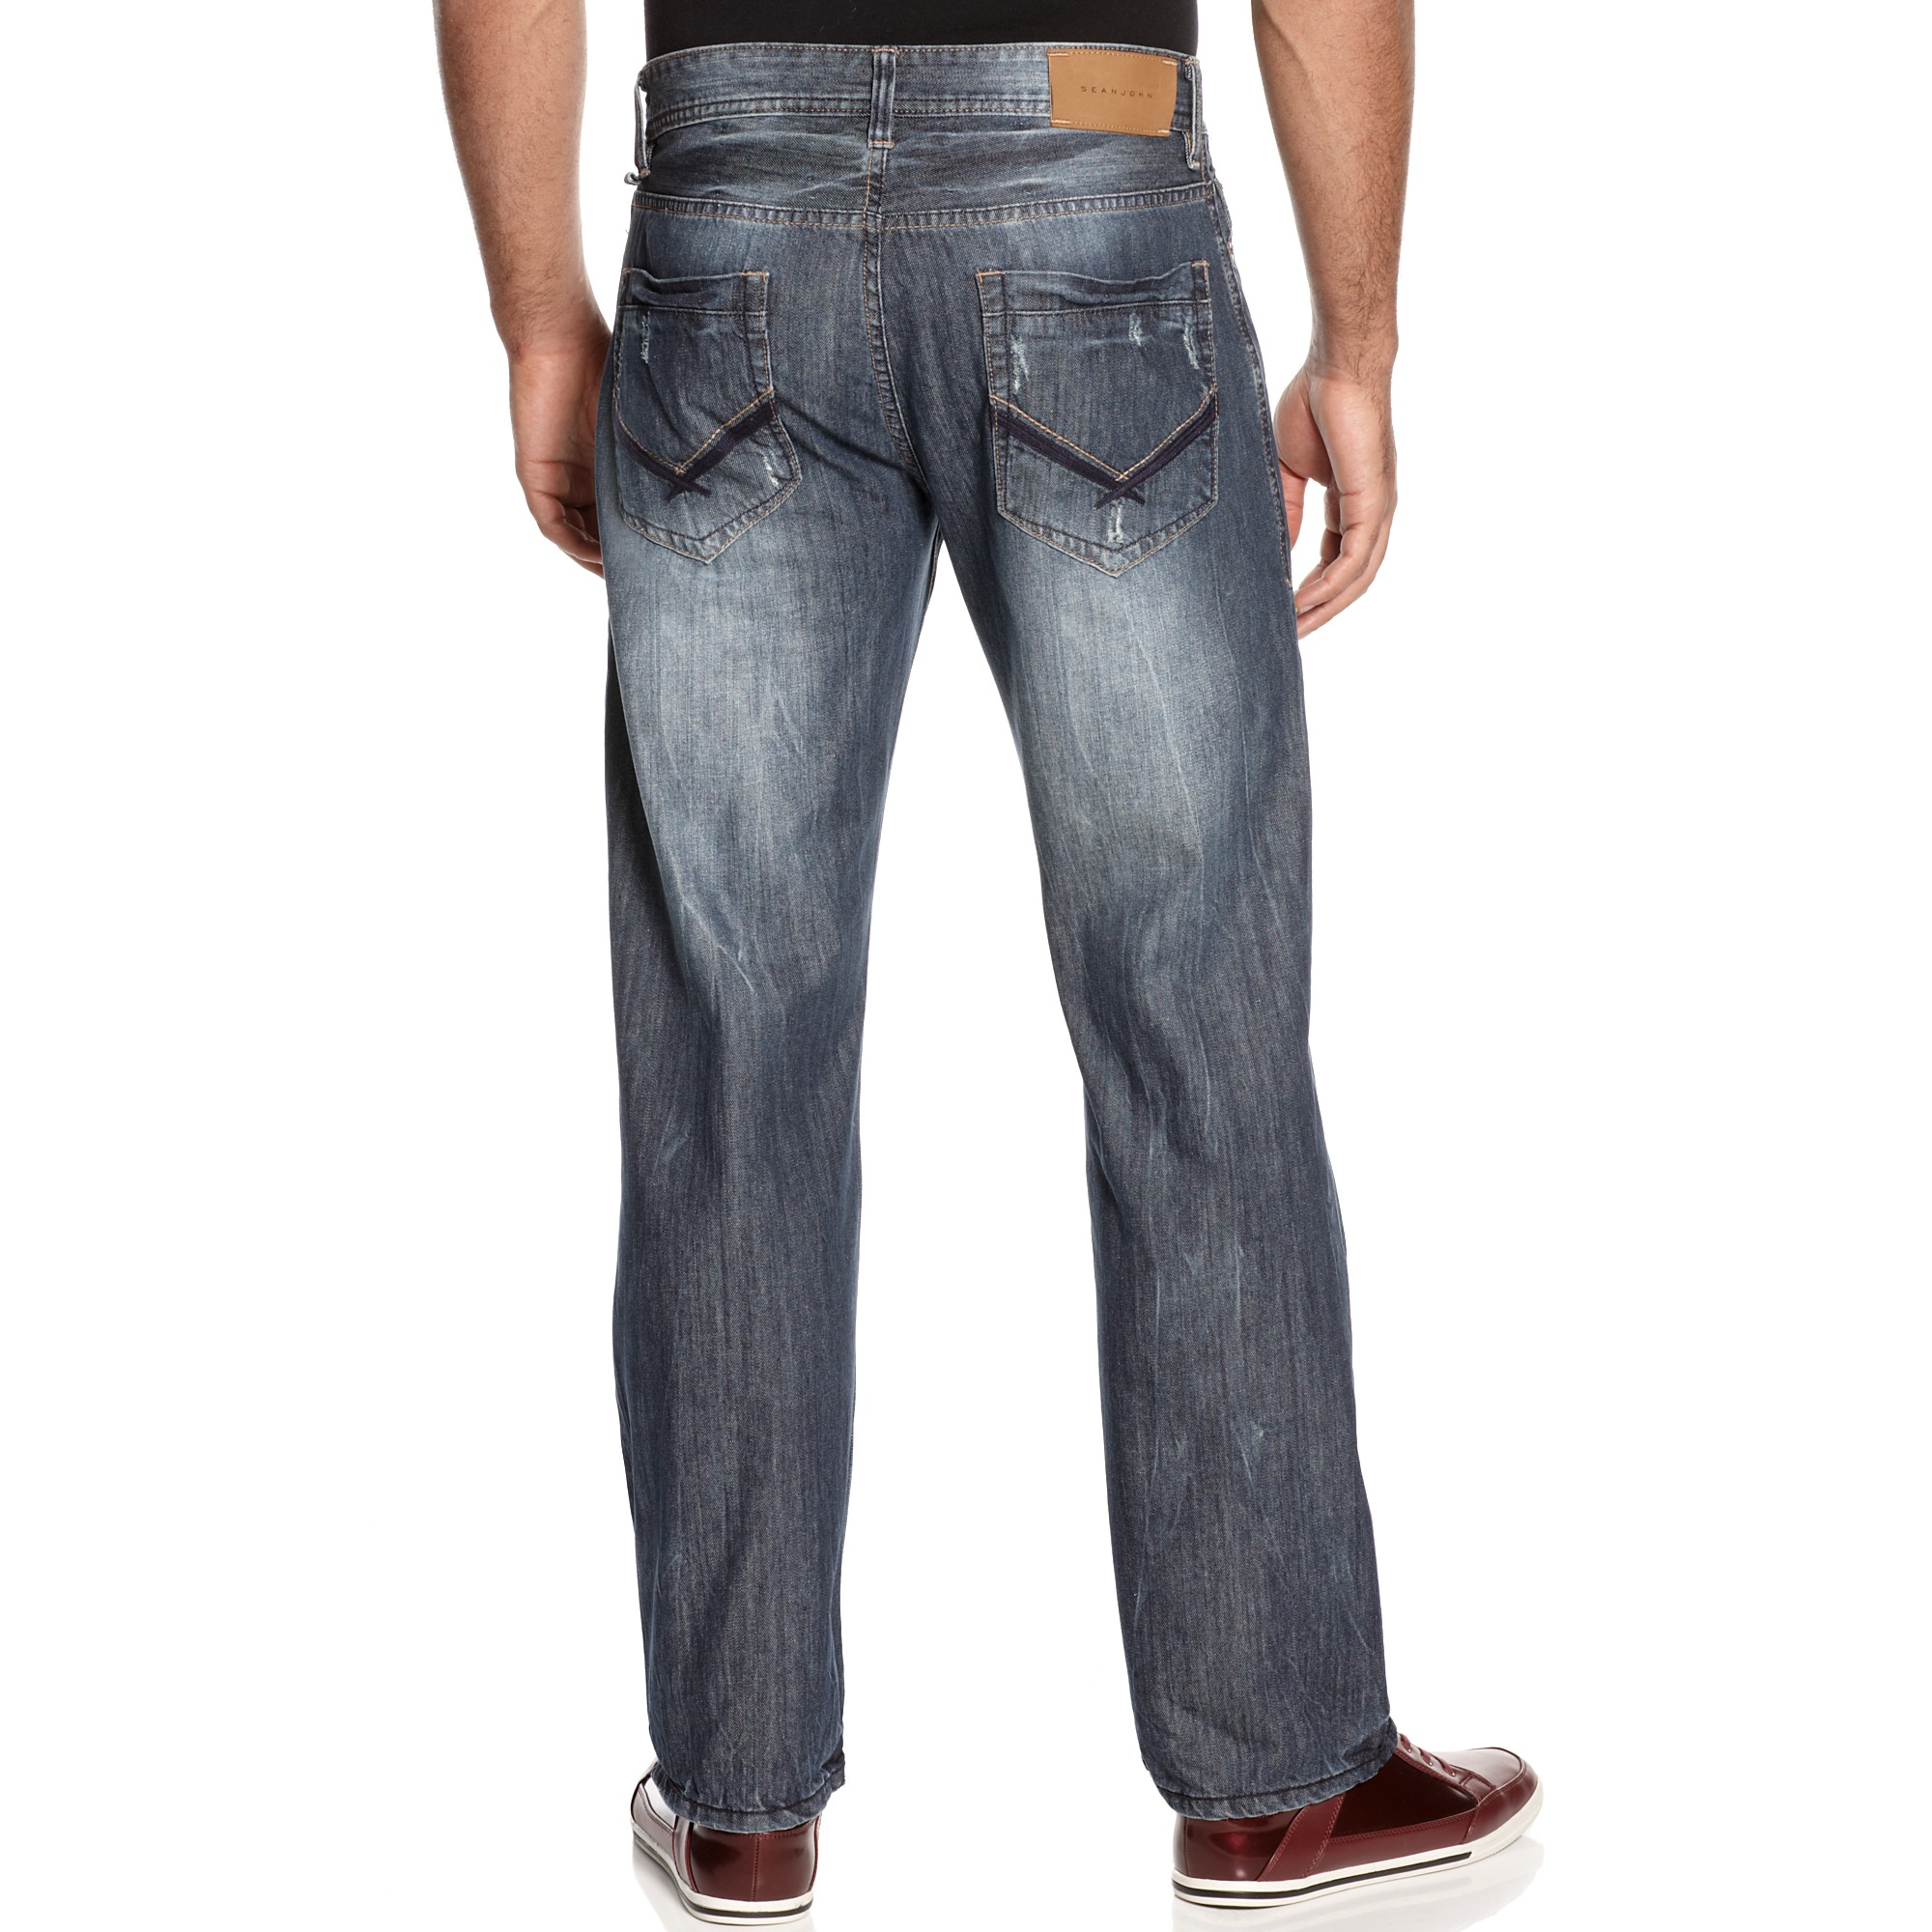 Sean John Jeans X Deco Hamilton Relaxed Fit Jeans in Blue for Men - Lyst